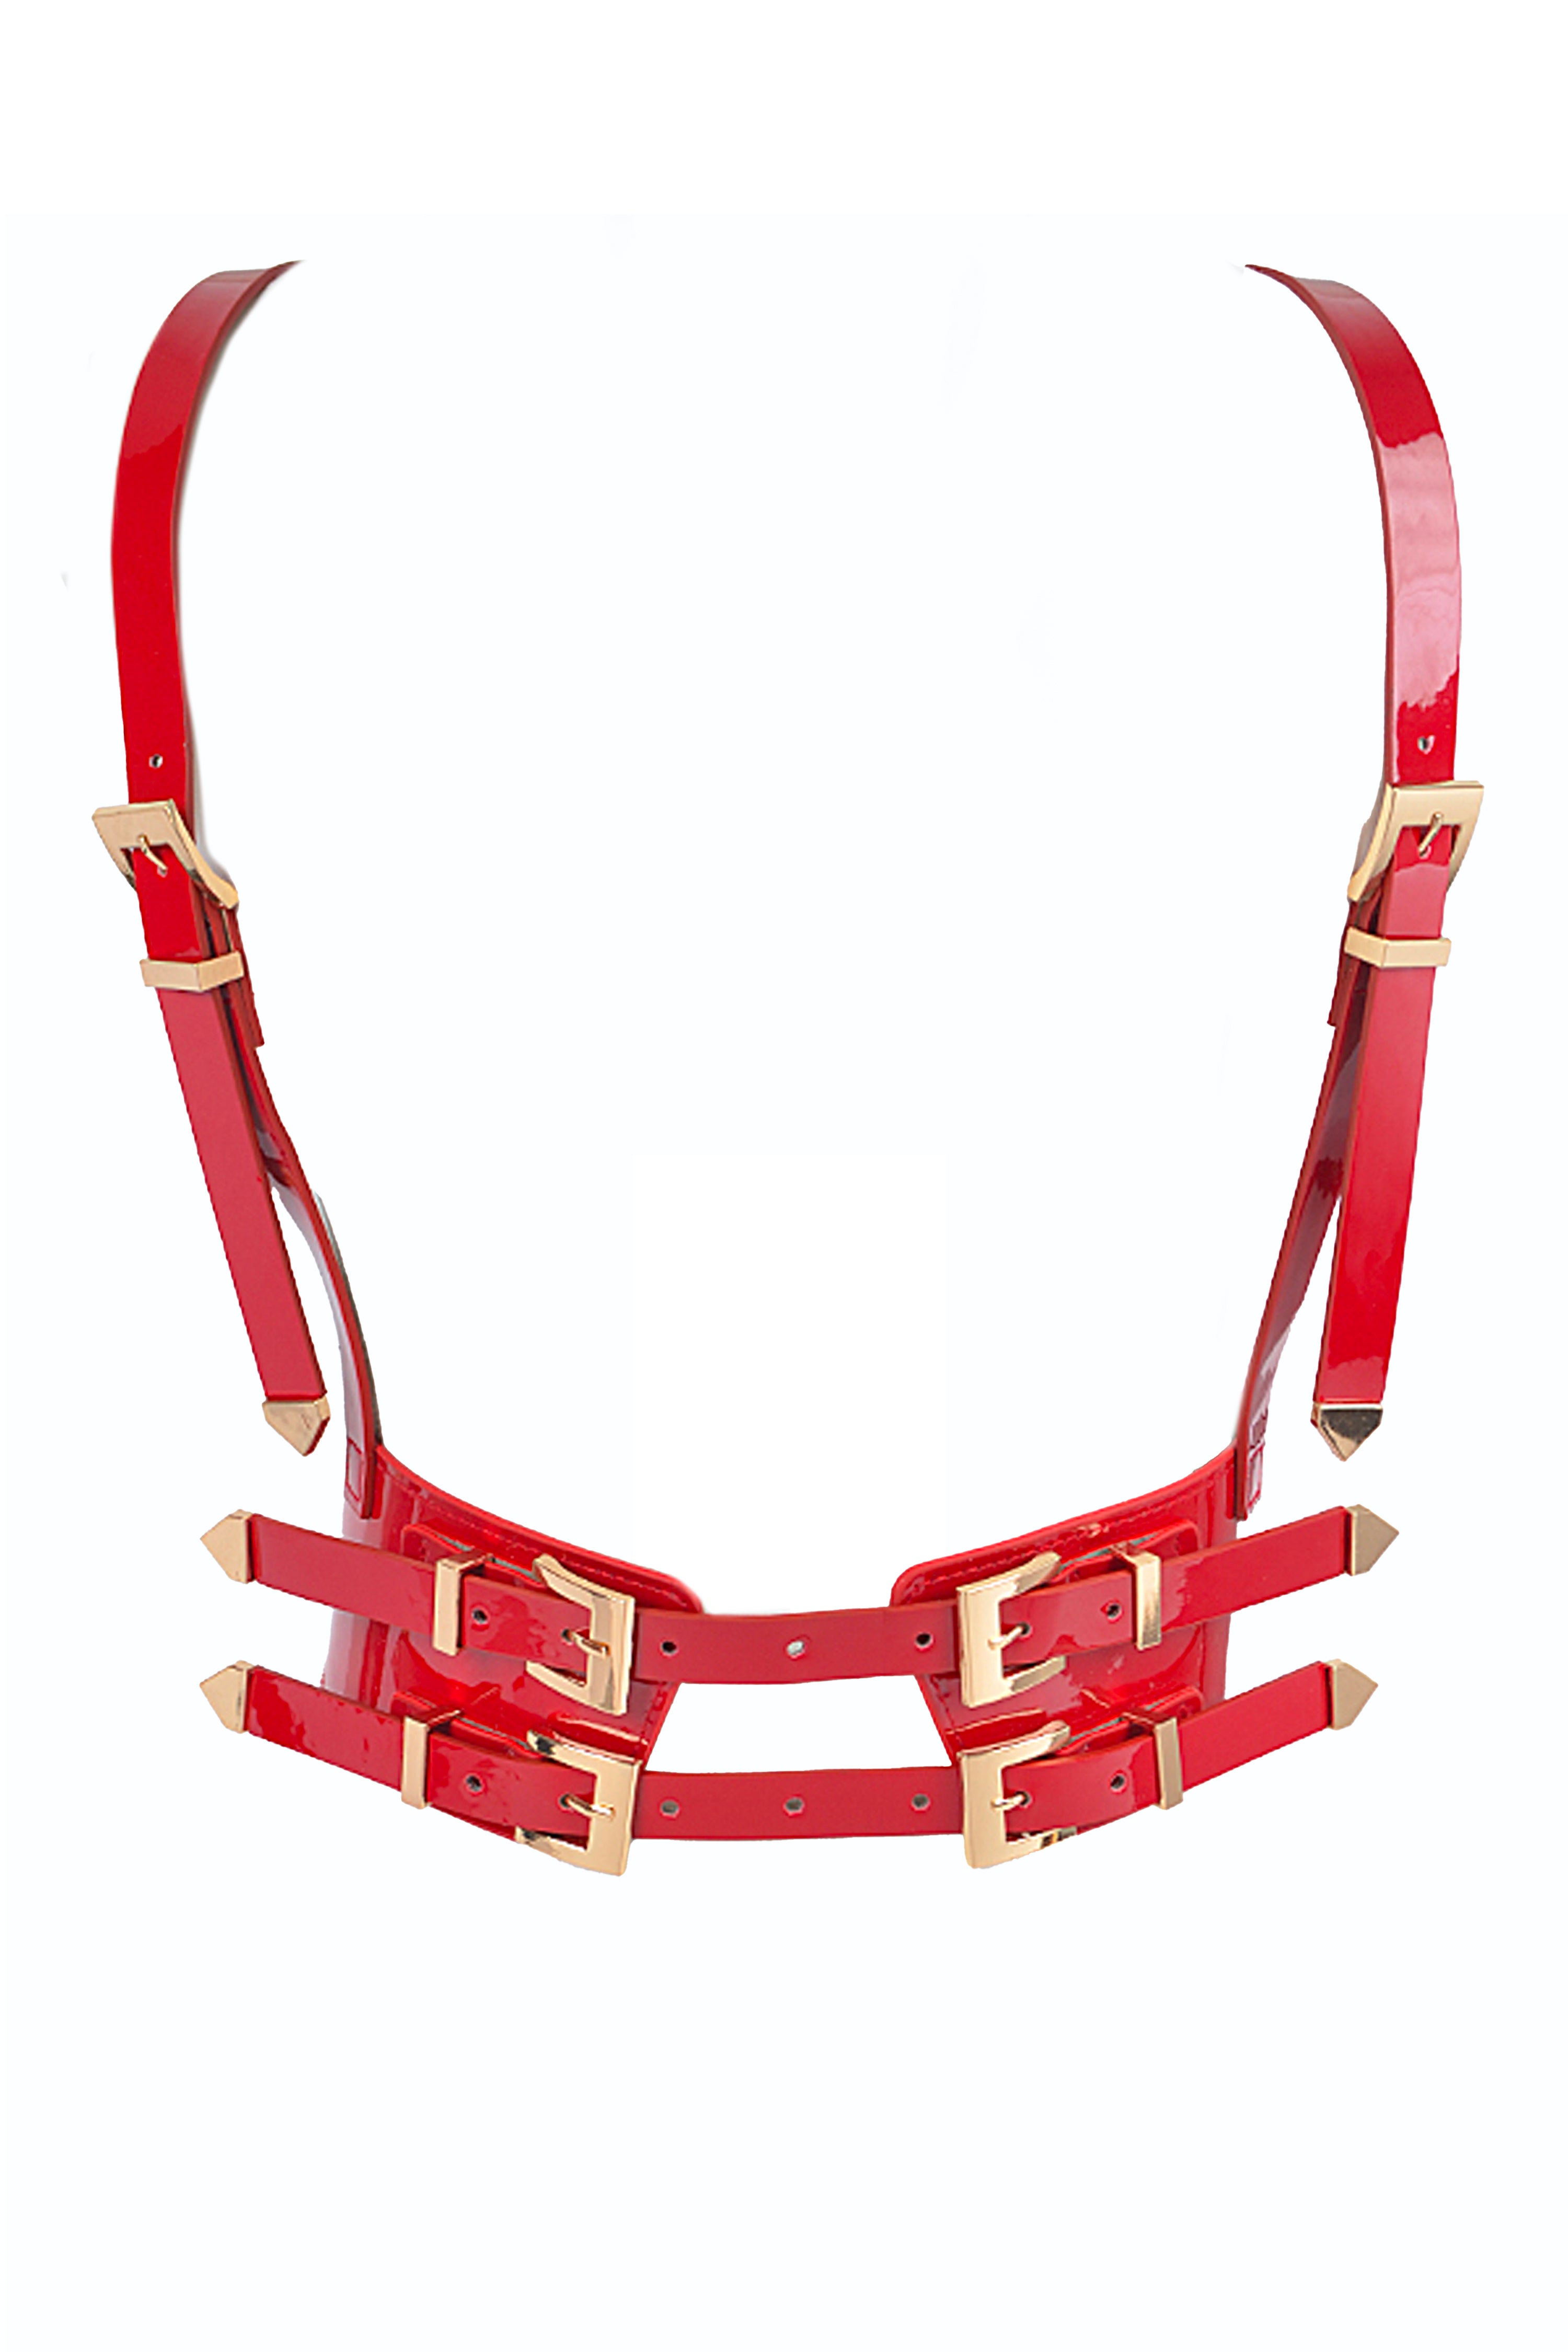 Shiny red patent leather harness with adjustable straps and gold hardware